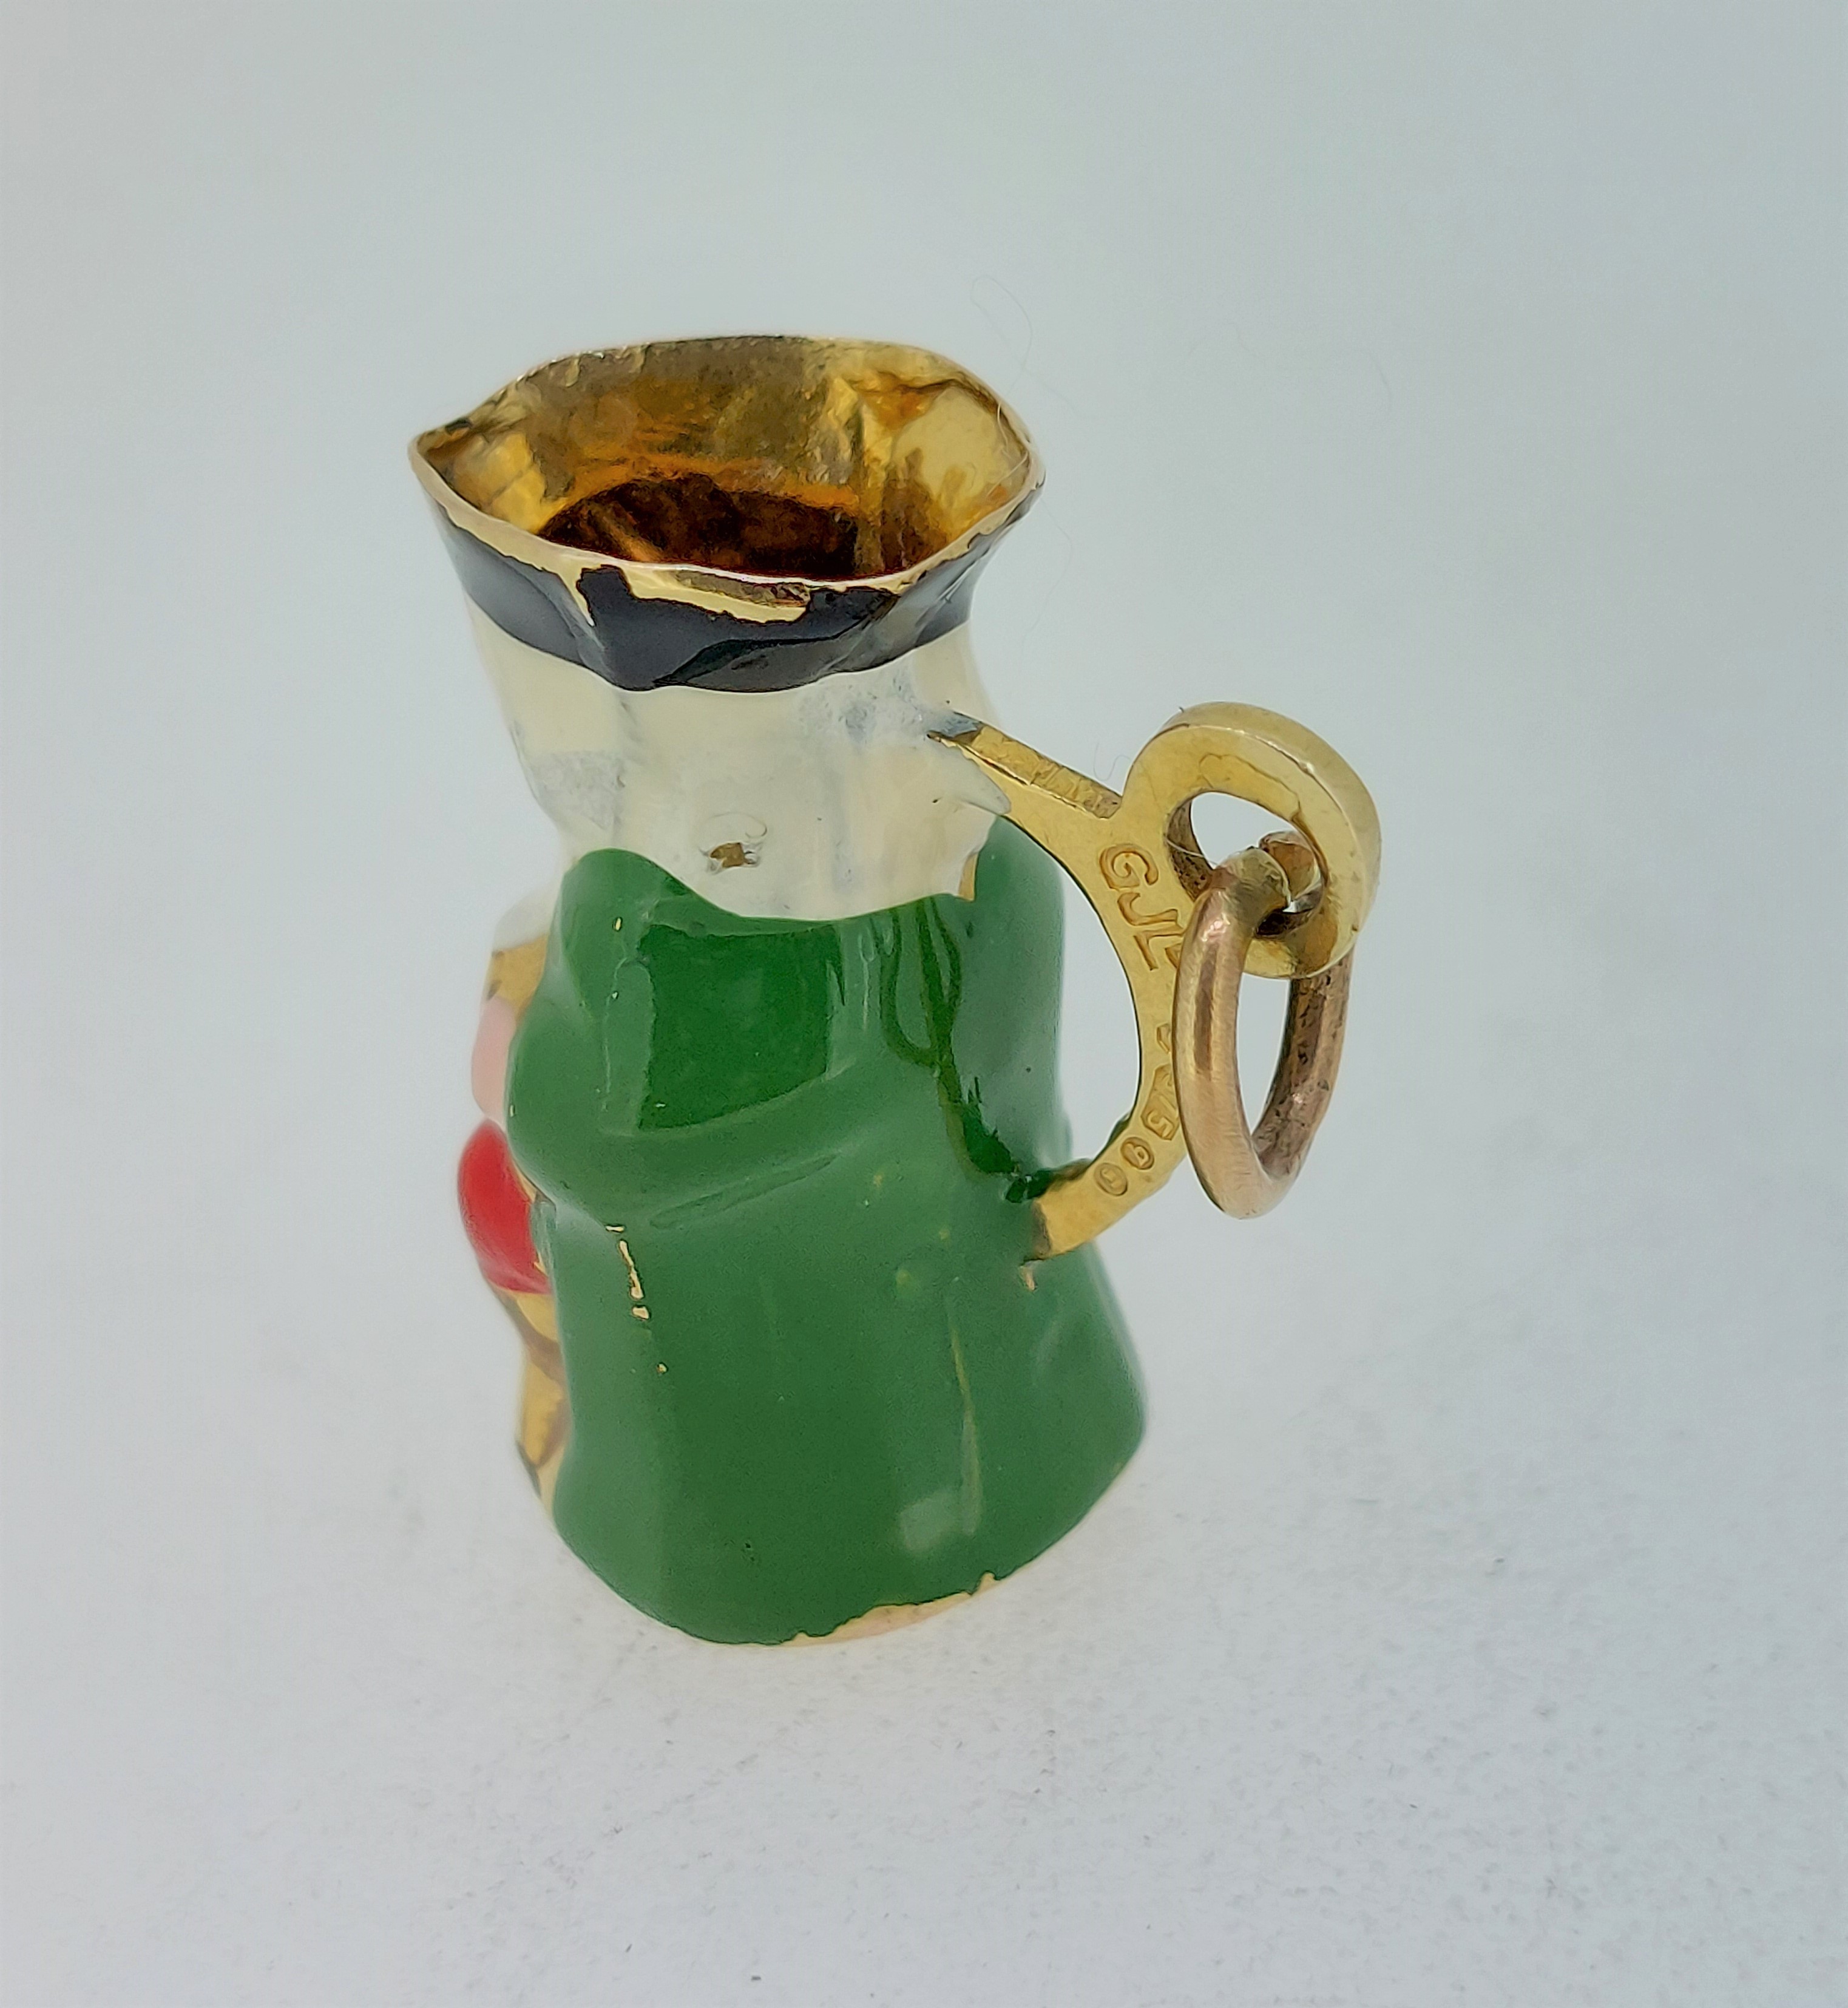 9ct Yellow Gold (375) Enamelled Toby Jug Charm Pendant - Image 3 of 8